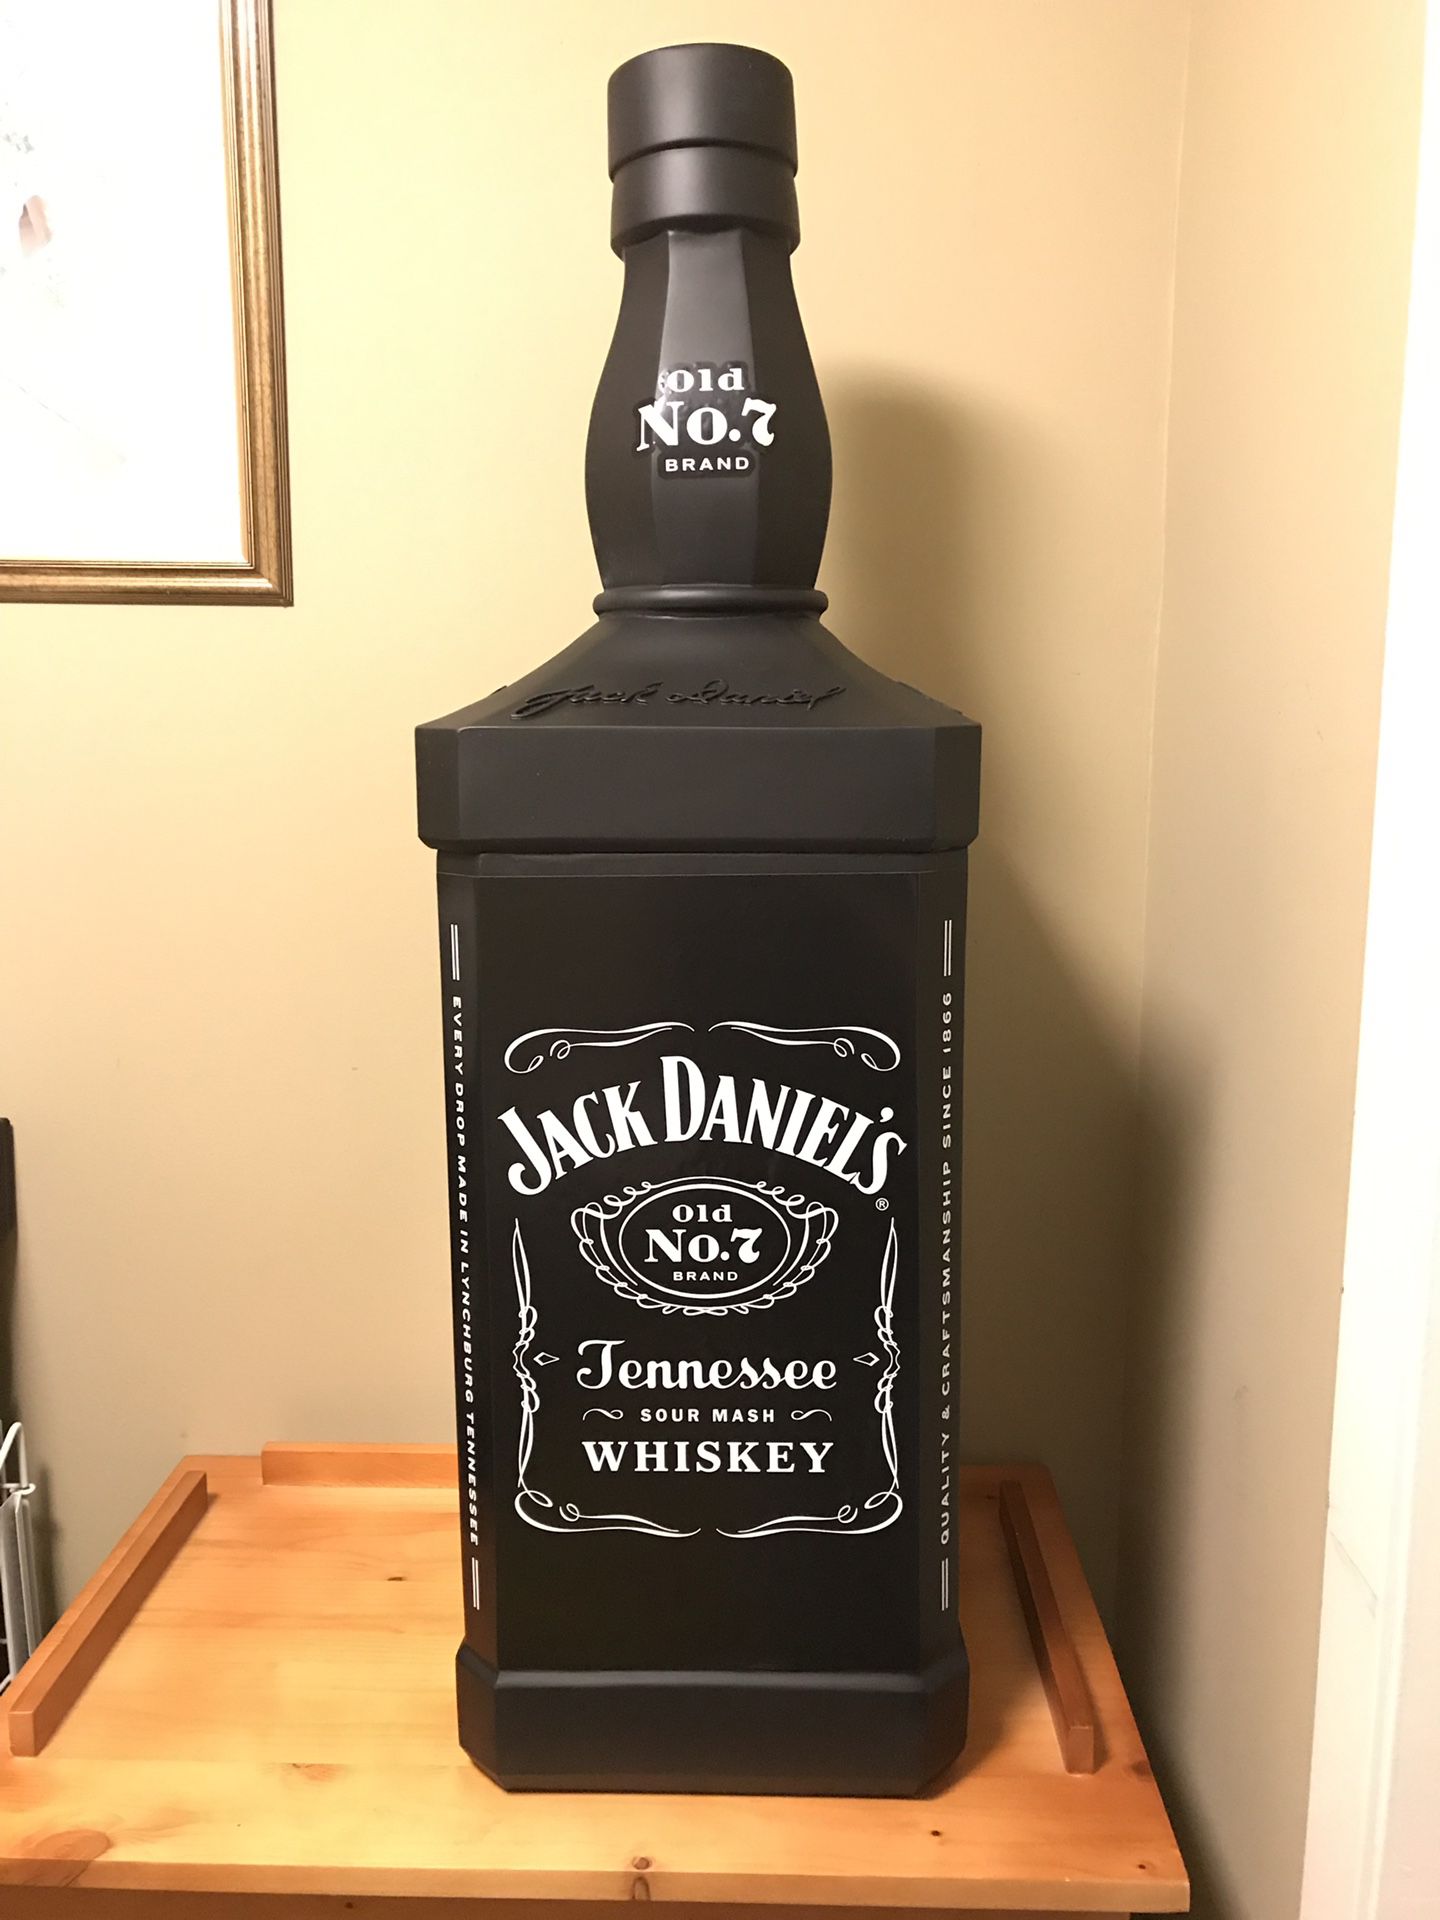 JACK DANIELS LARGE DISPLAY Glass DECOR BOTTLE TENNESSEE WHISKEY Over 1.5'  Tall